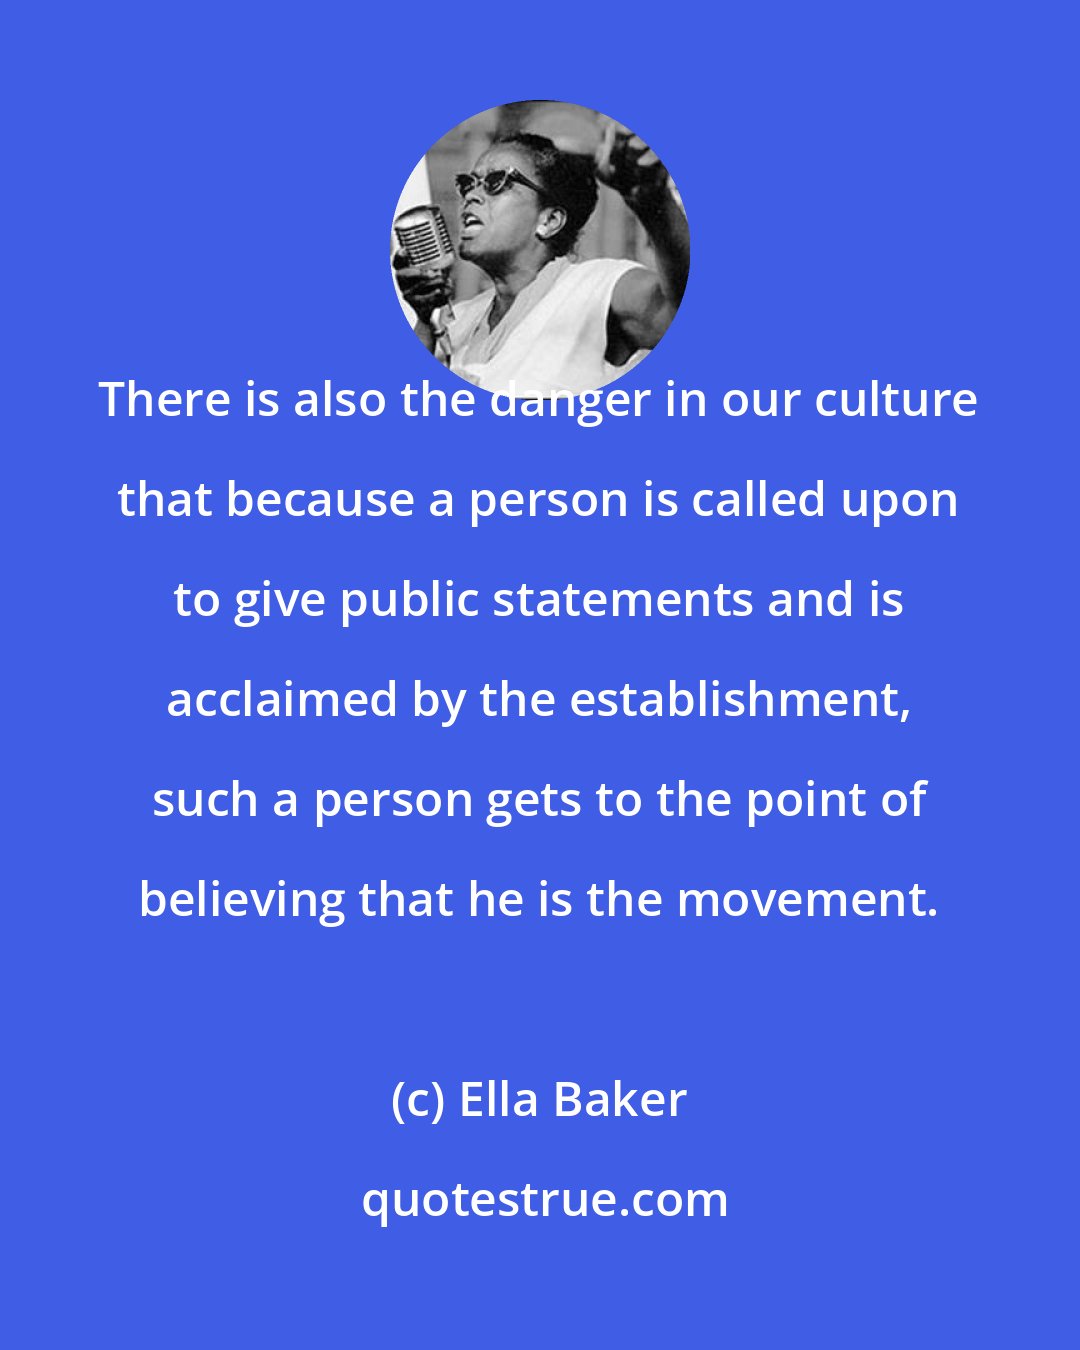 Ella Baker: There is also the danger in our culture that because a person is called upon to give public statements and is acclaimed by the establishment, such a person gets to the point of believing that he is the movement.